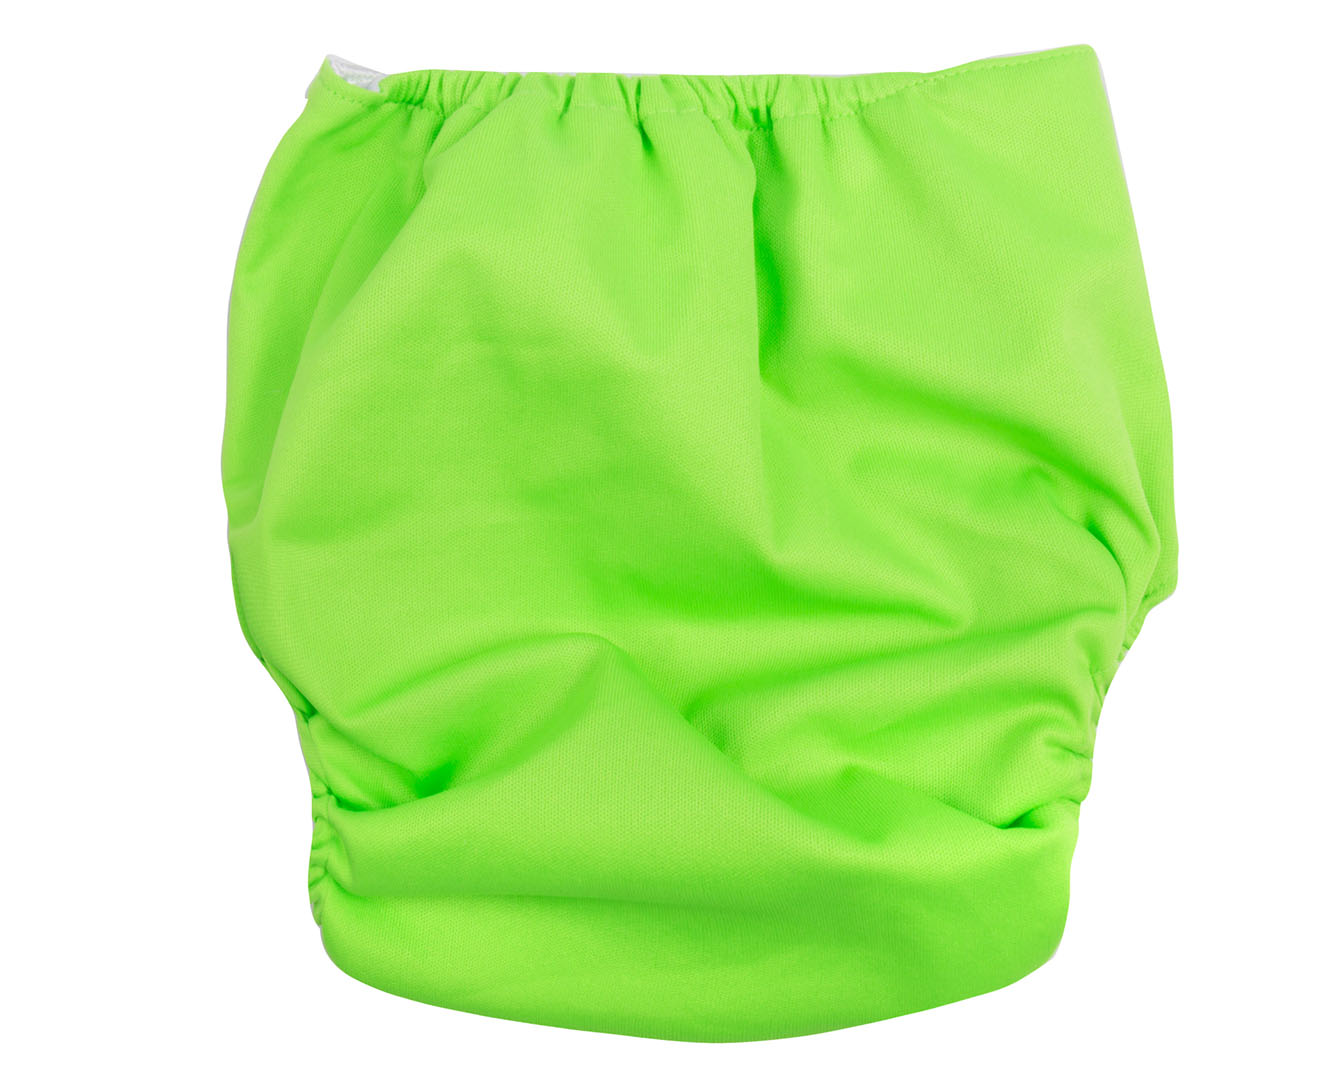 Swimmies Basic Swim Nappy Size 3-24 Months - Neon Green | Great daily ...